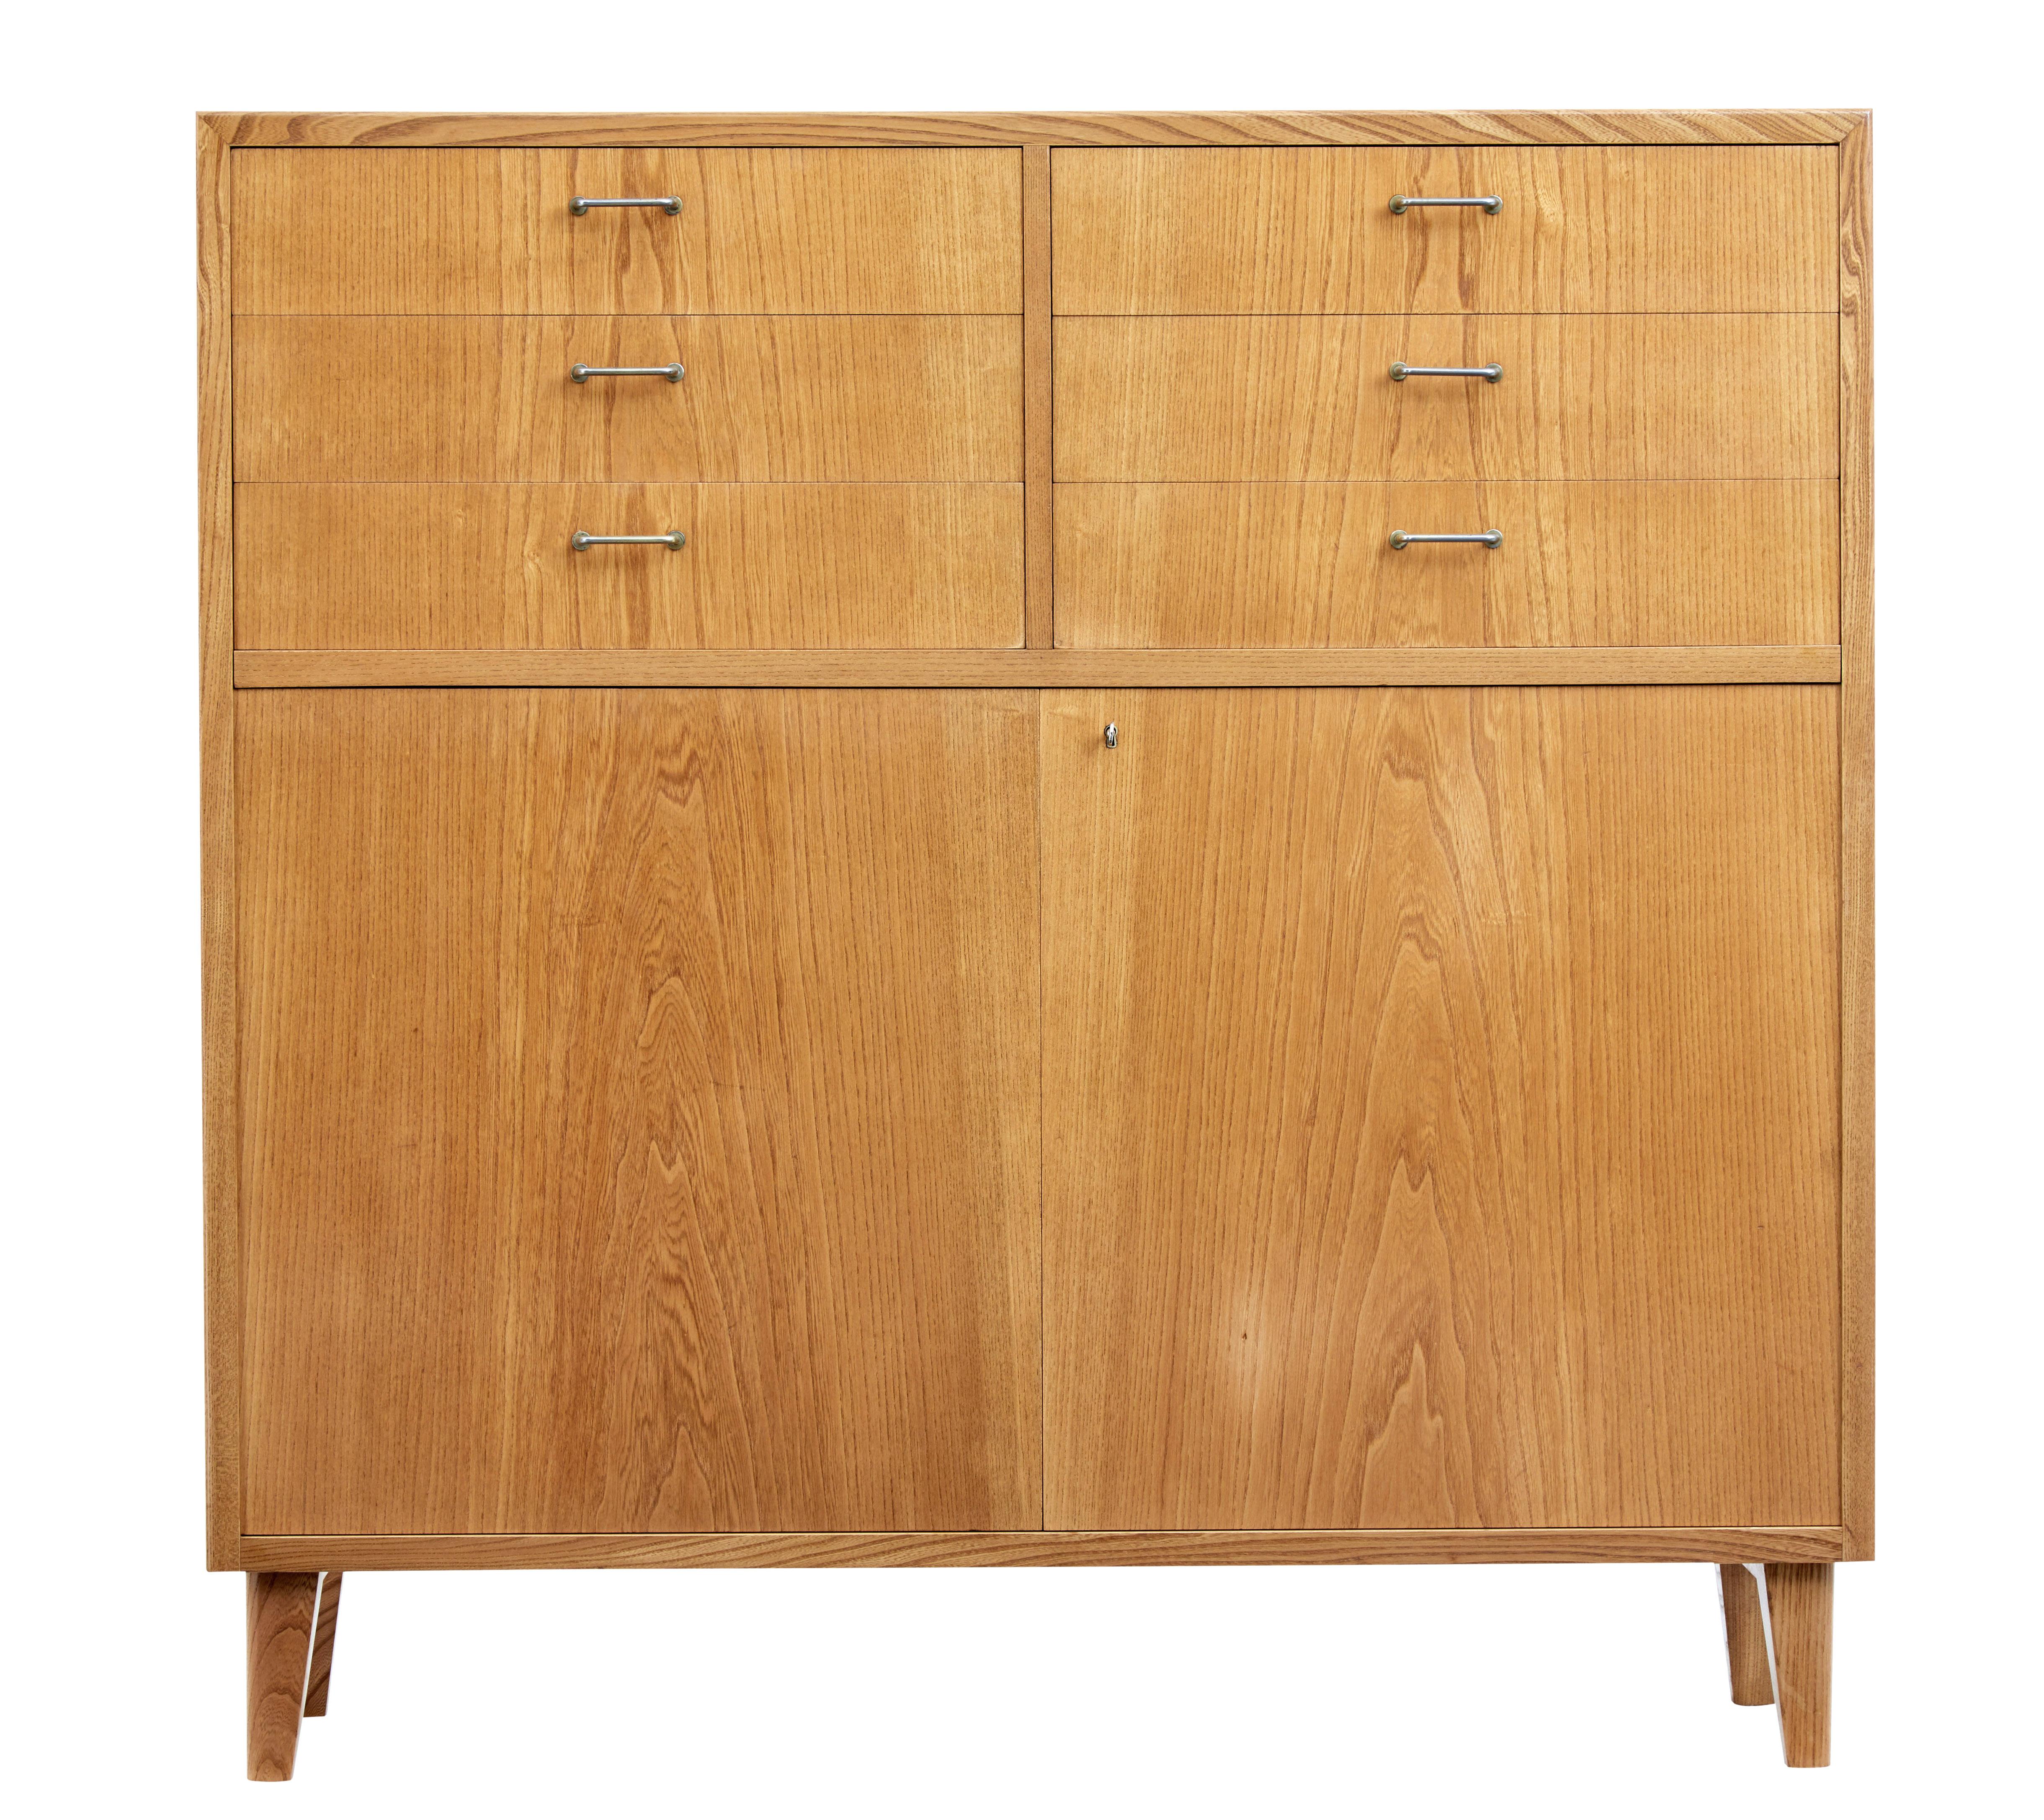 Small Scandinavian mid-20th century elm sideboard, circa 1950.

We are pleased to offer this delightful small cabinet which offers perfect storage for the modern home. Well proportioned with the same height and width. Beautifully veneered in elm,